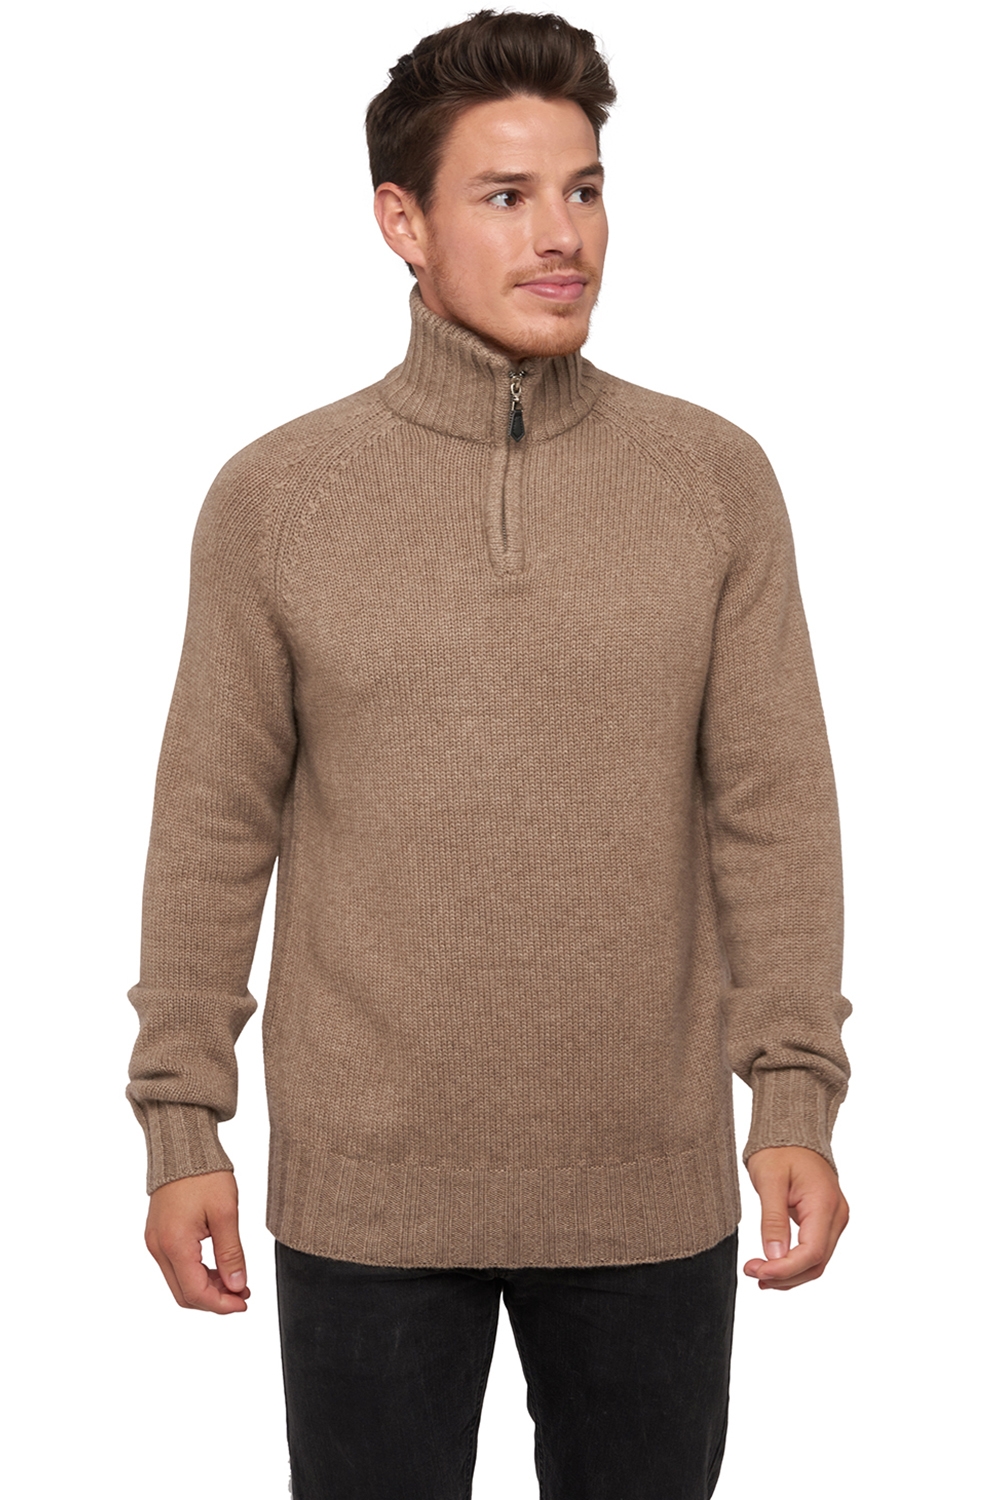  men polo style sweaters natural viero natural brown 2xl